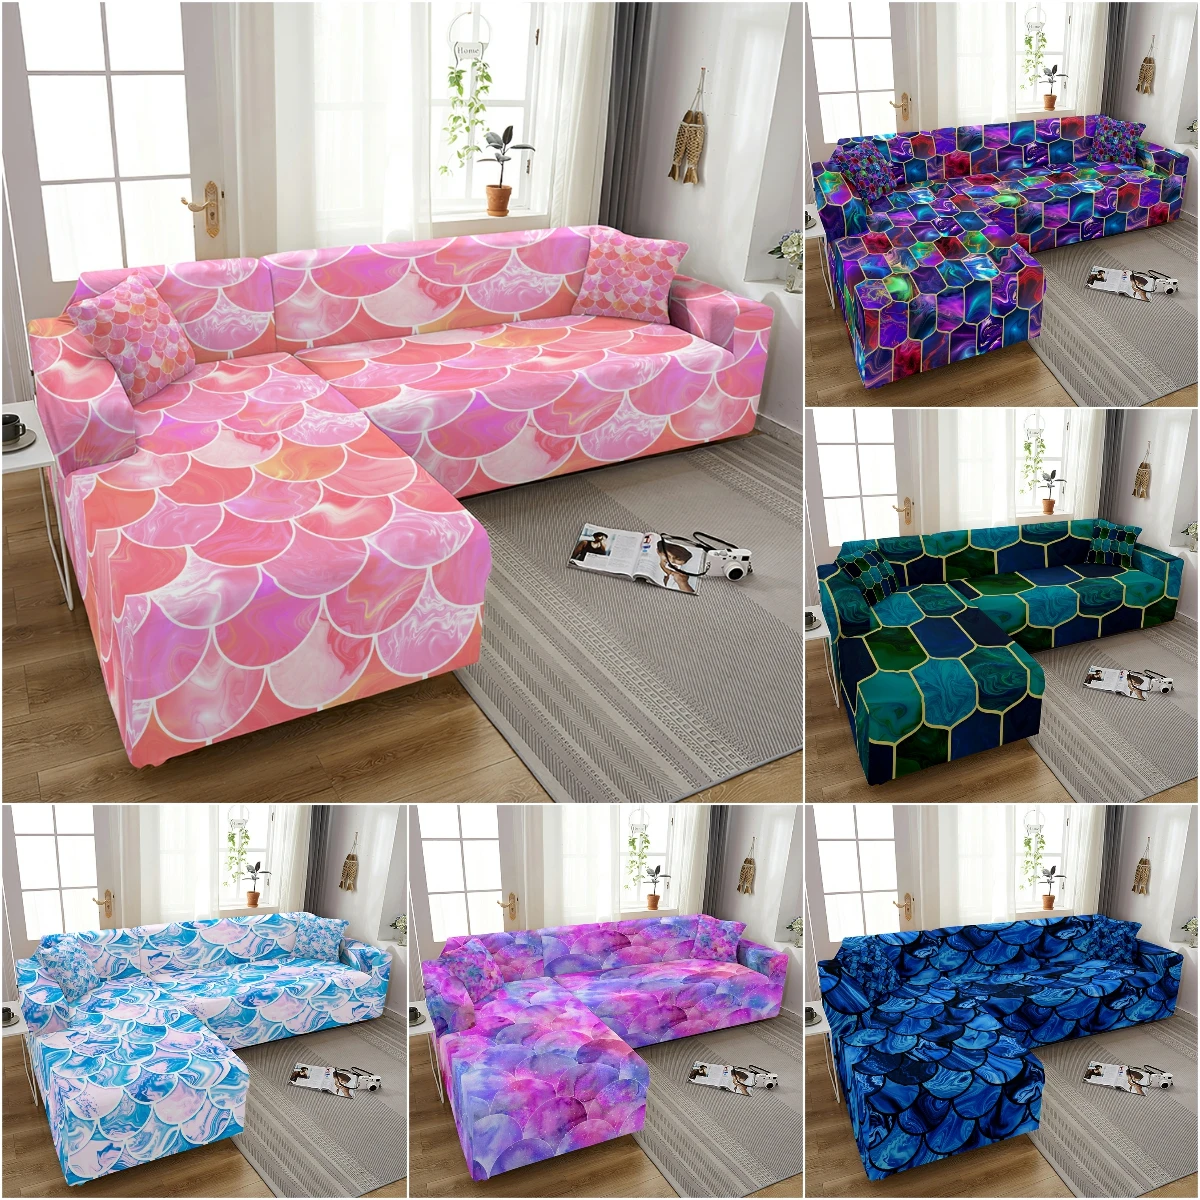 Sofa Cover For Living Room Mermaid Scales Printed Slipcover L Shaped Corner Sofa Cover Funda Sofa Elastic Couch Cover 1-4 Seater